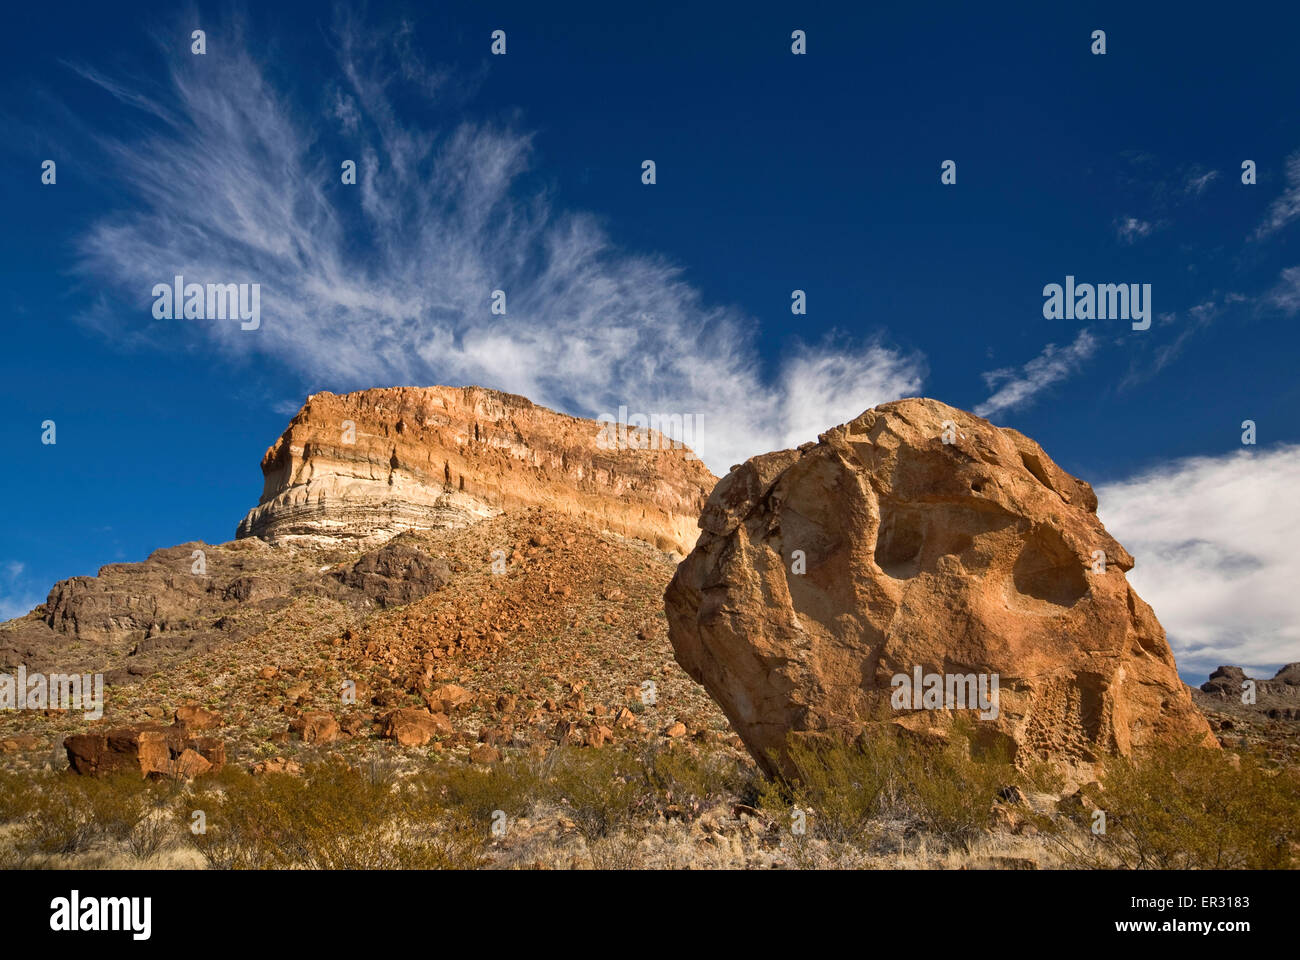 Volcanic rock, Cerro Castellan butte formation at Ross Maxwell Scenic Drive, Chihuahuan Desert in Big Bend National Park, Texas Stock Photo